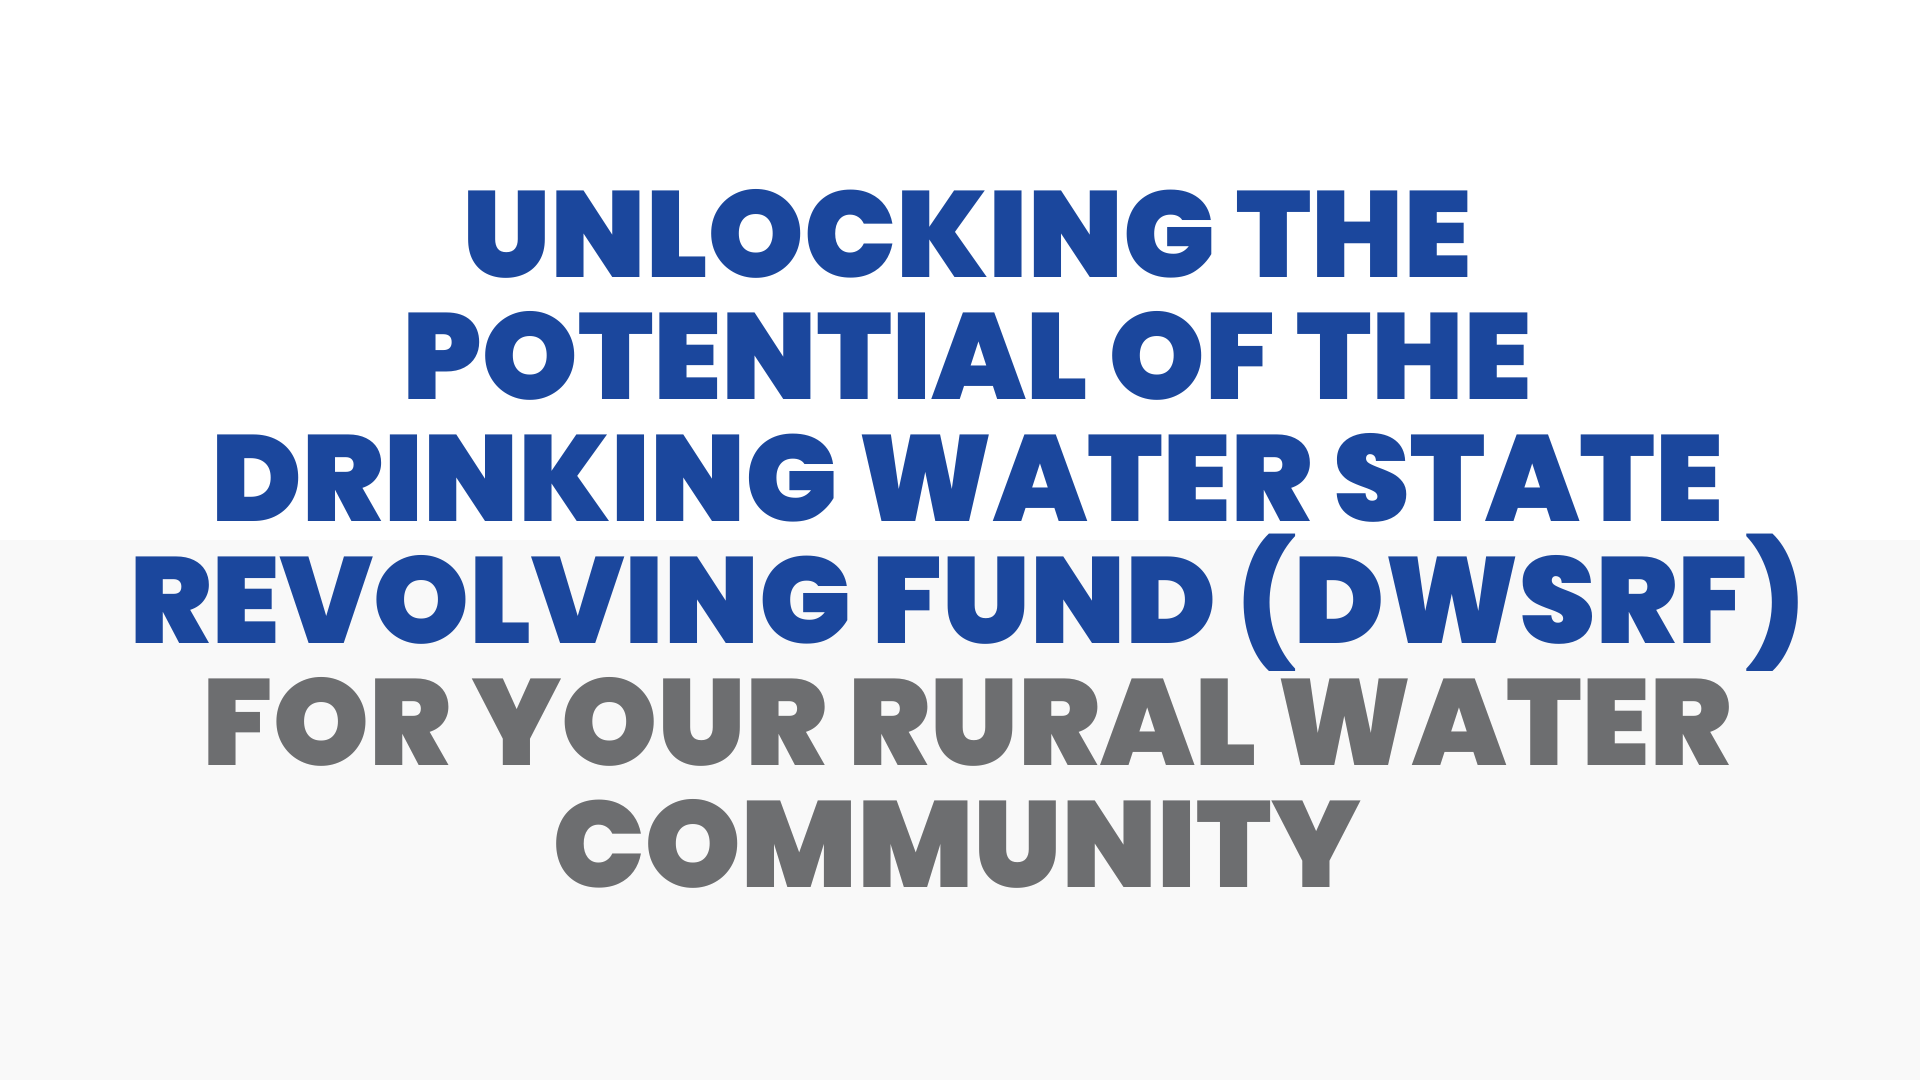 Unlocking the Potential of the Drinking Water State Revolving Fund (DWSRF) for Your Rural Water Community